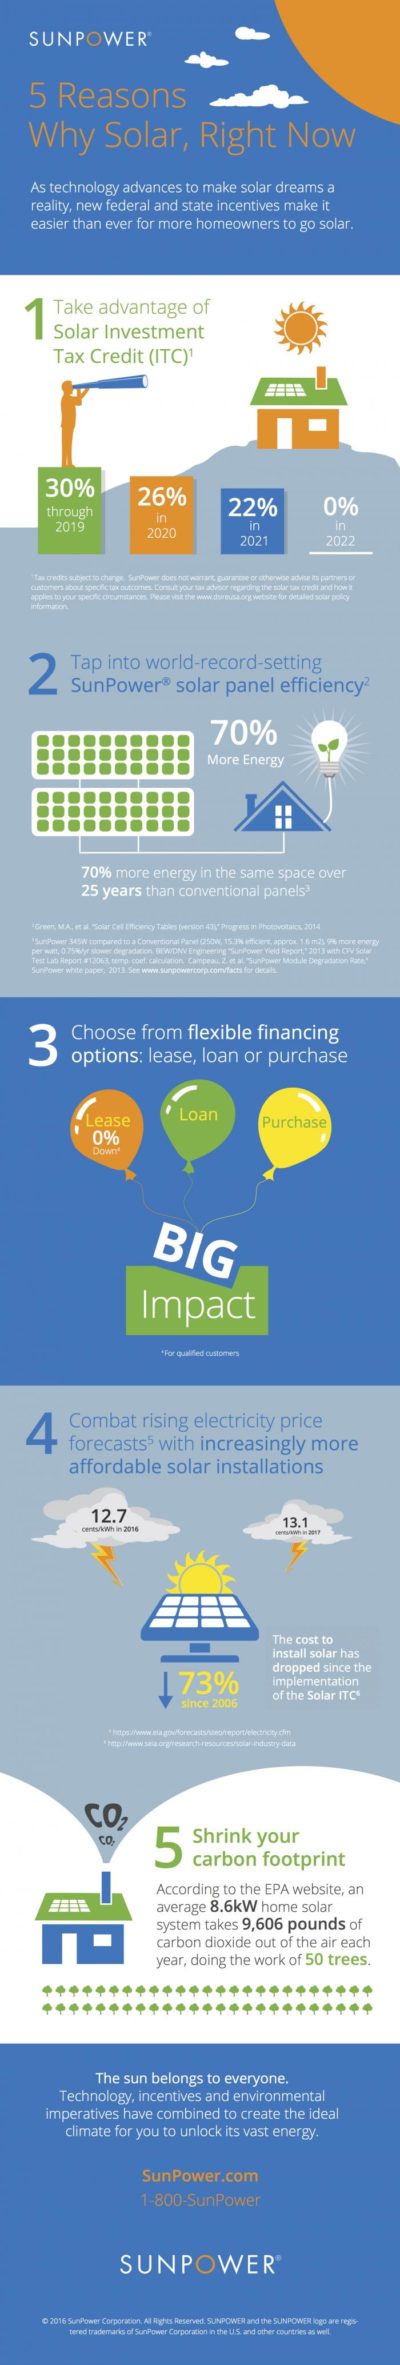 Graph 5 Reasons Why To Go Solar, including flexible financing options: lease, loan, or purchase.